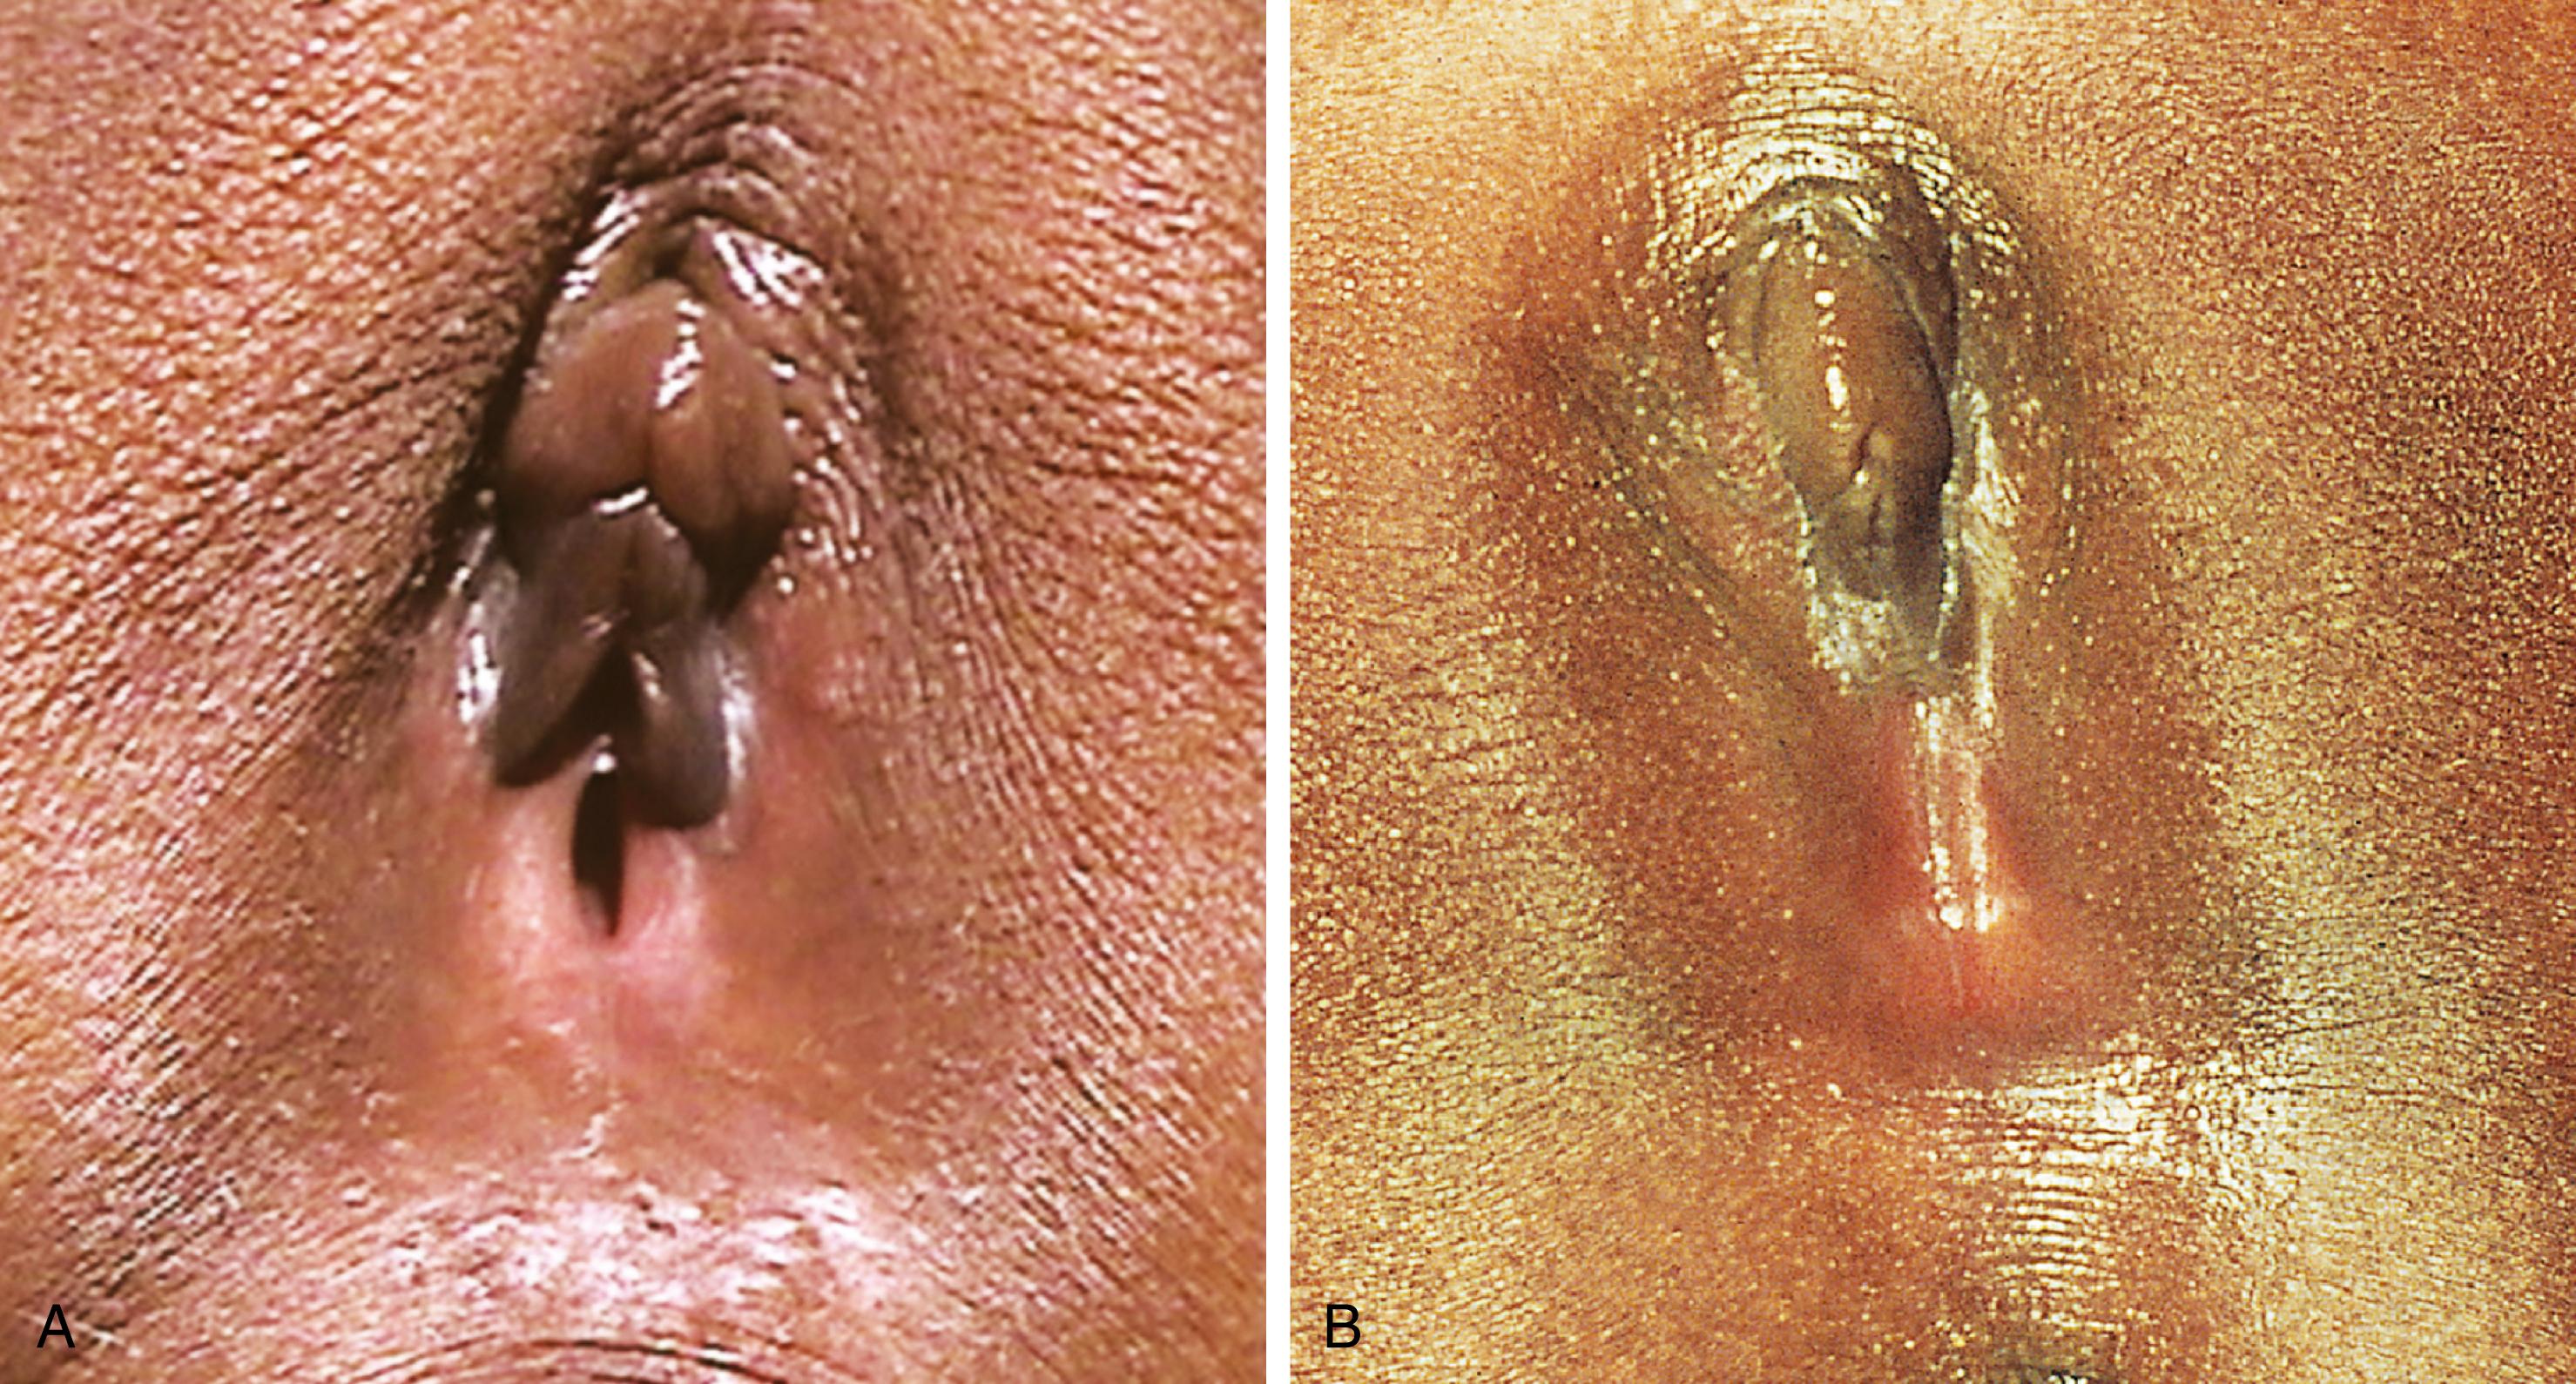 Fig. 19.10, Labial adhesions. Agglutination and adhesion of the labia minora, as a result of healing after inflammation, produce the appearance of a smooth flat surface overlying the introitus, divided centrally by a thin lucent line. (A) In this infant, the fused portion involves the posterior half of the introitus. (B) In another, the fused area has extended much further anteriorly.